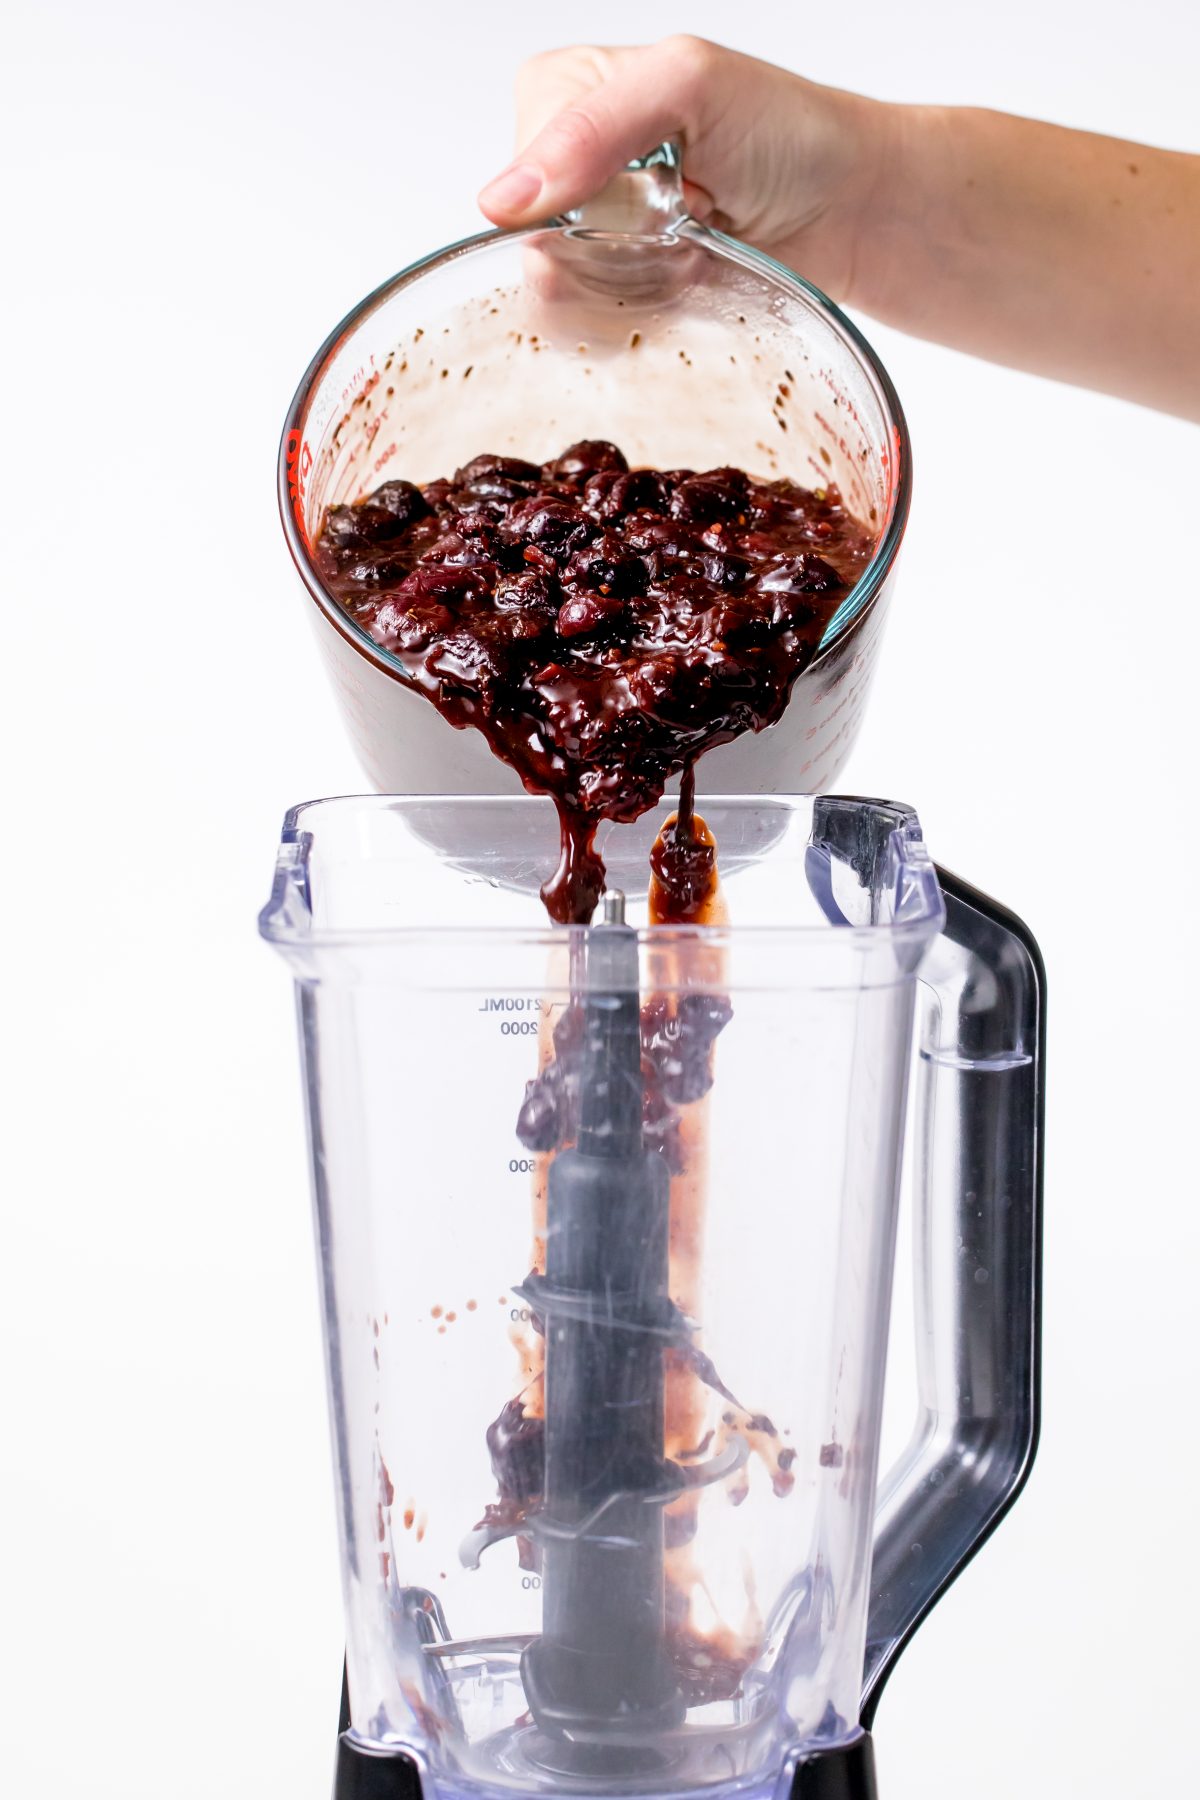 Pour cooled mixture into blender for cherry bbq sauce